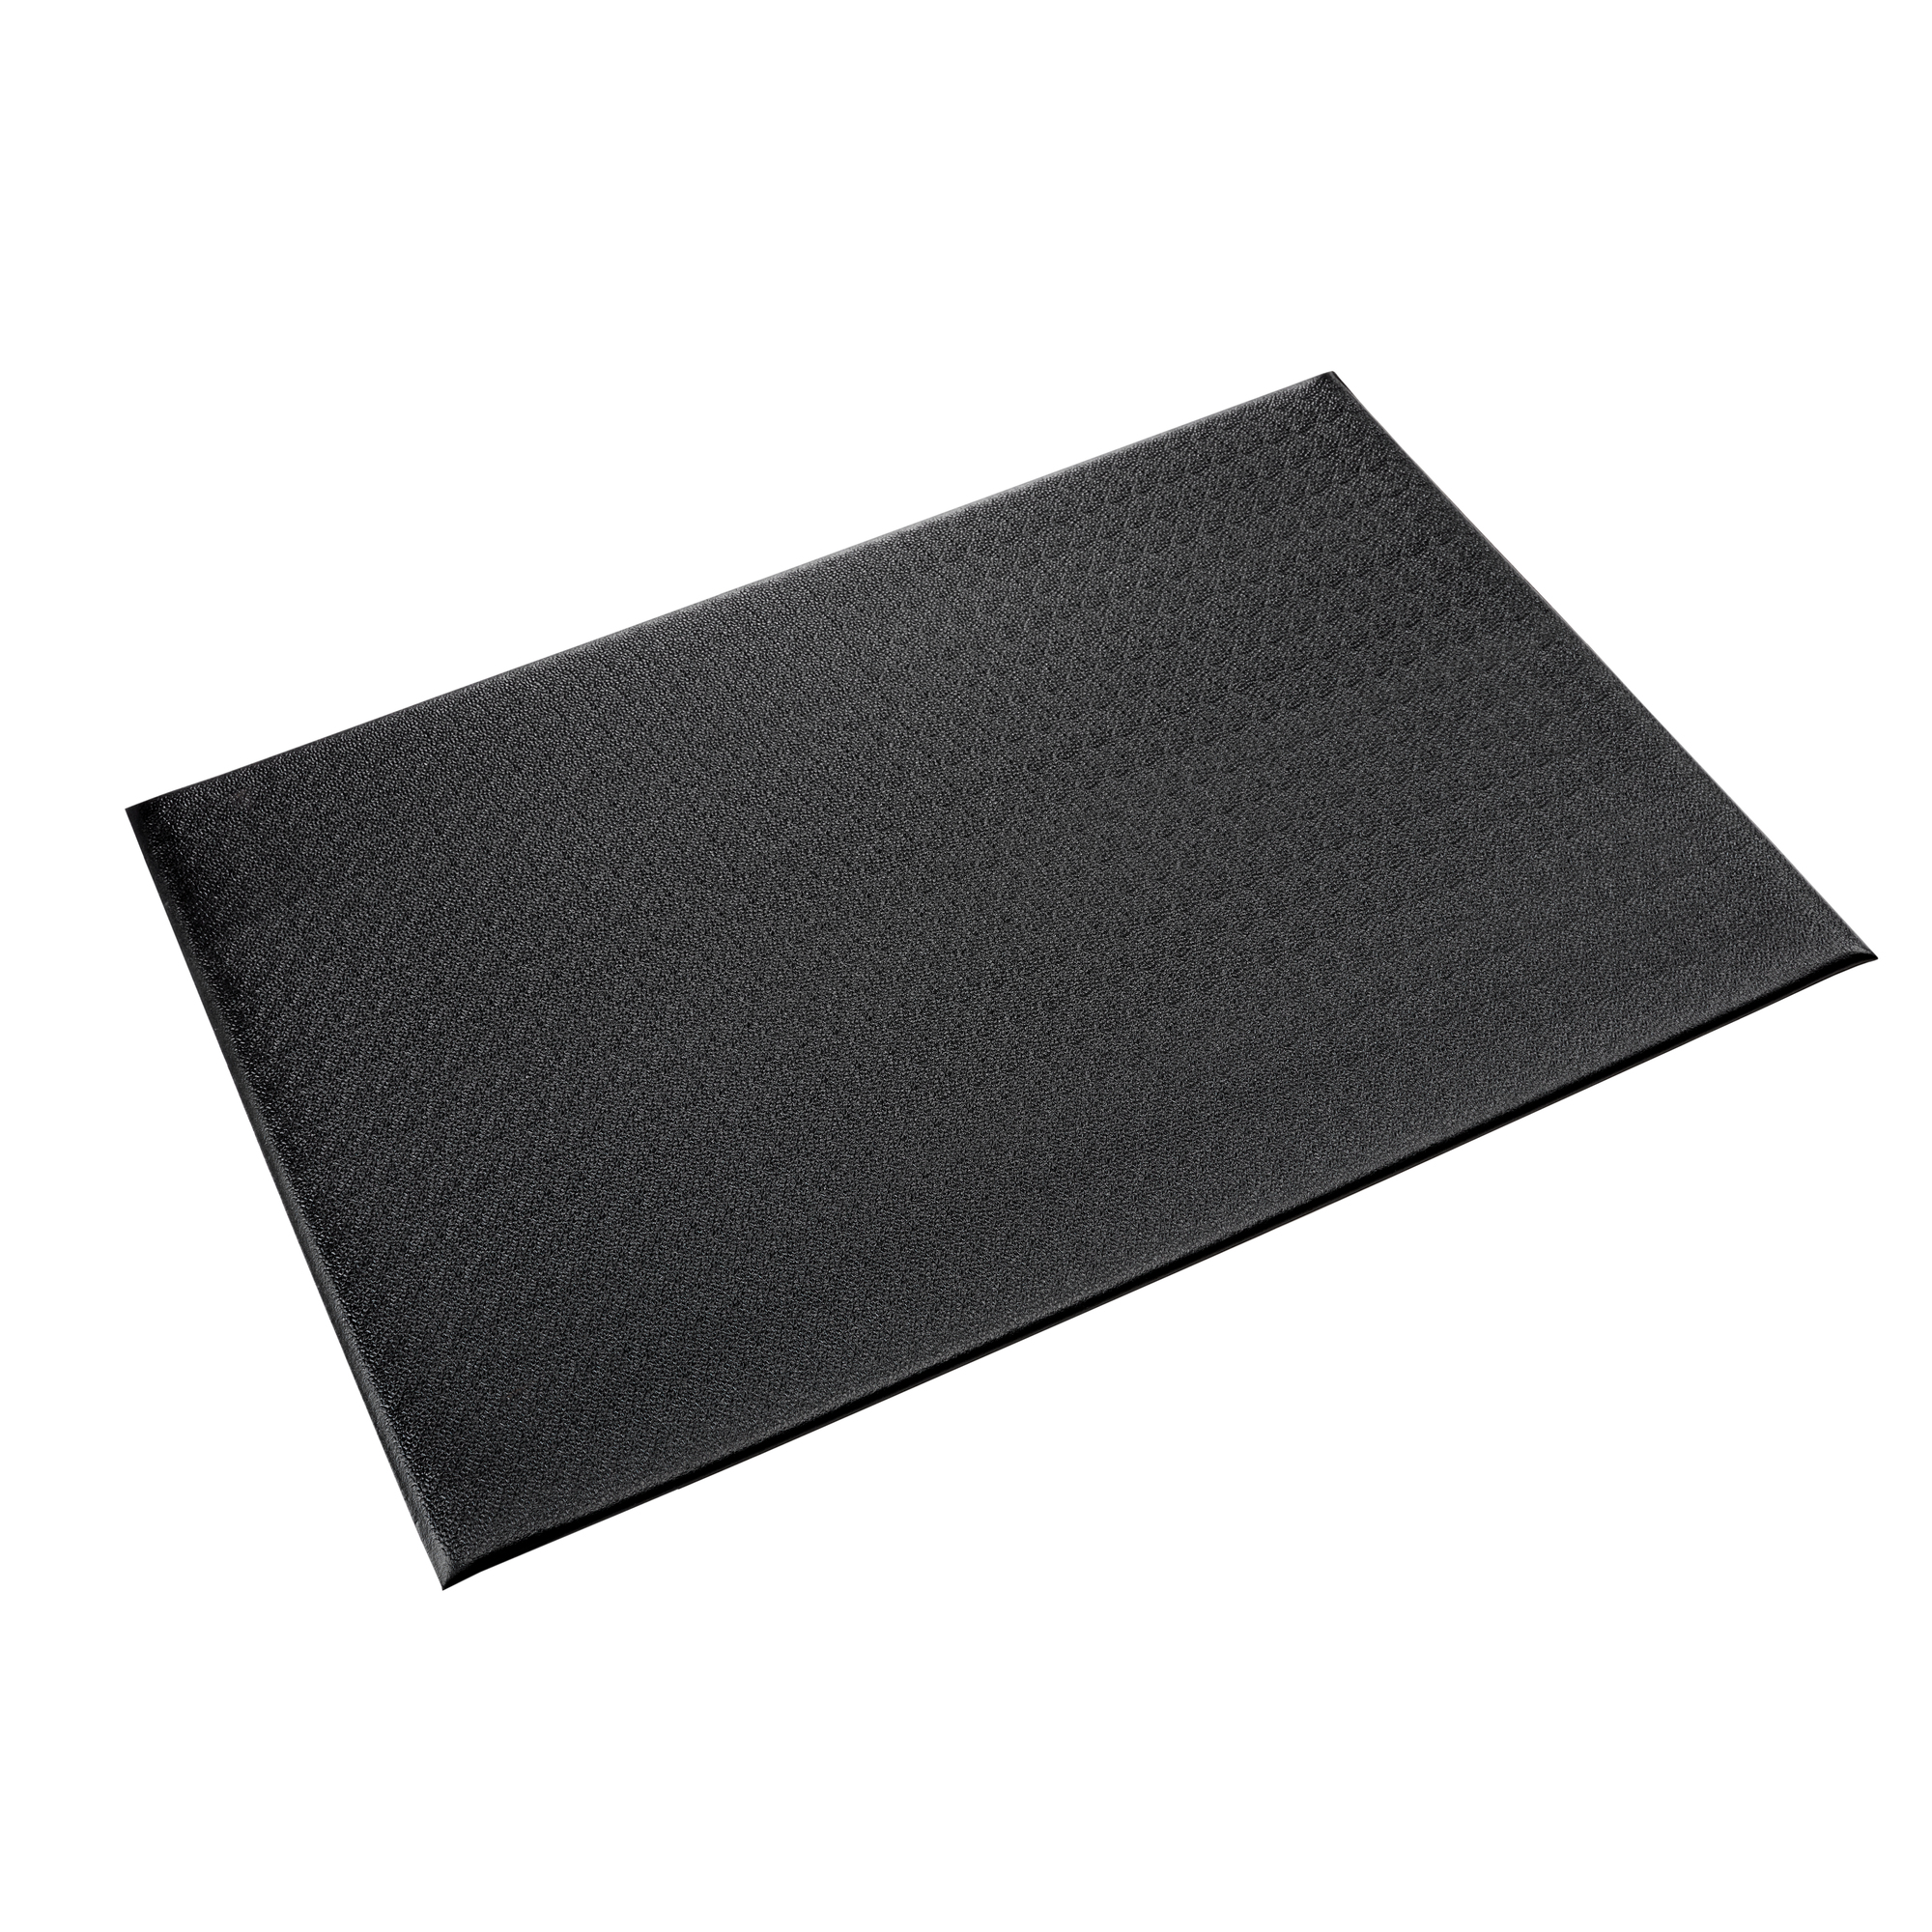 Crown Matting Technologies, Comfort-King 1/2 2ft.x3ft. Black, Width 24 in, Length 24 in, Thickness 1/2 in, Model K4 0023BK